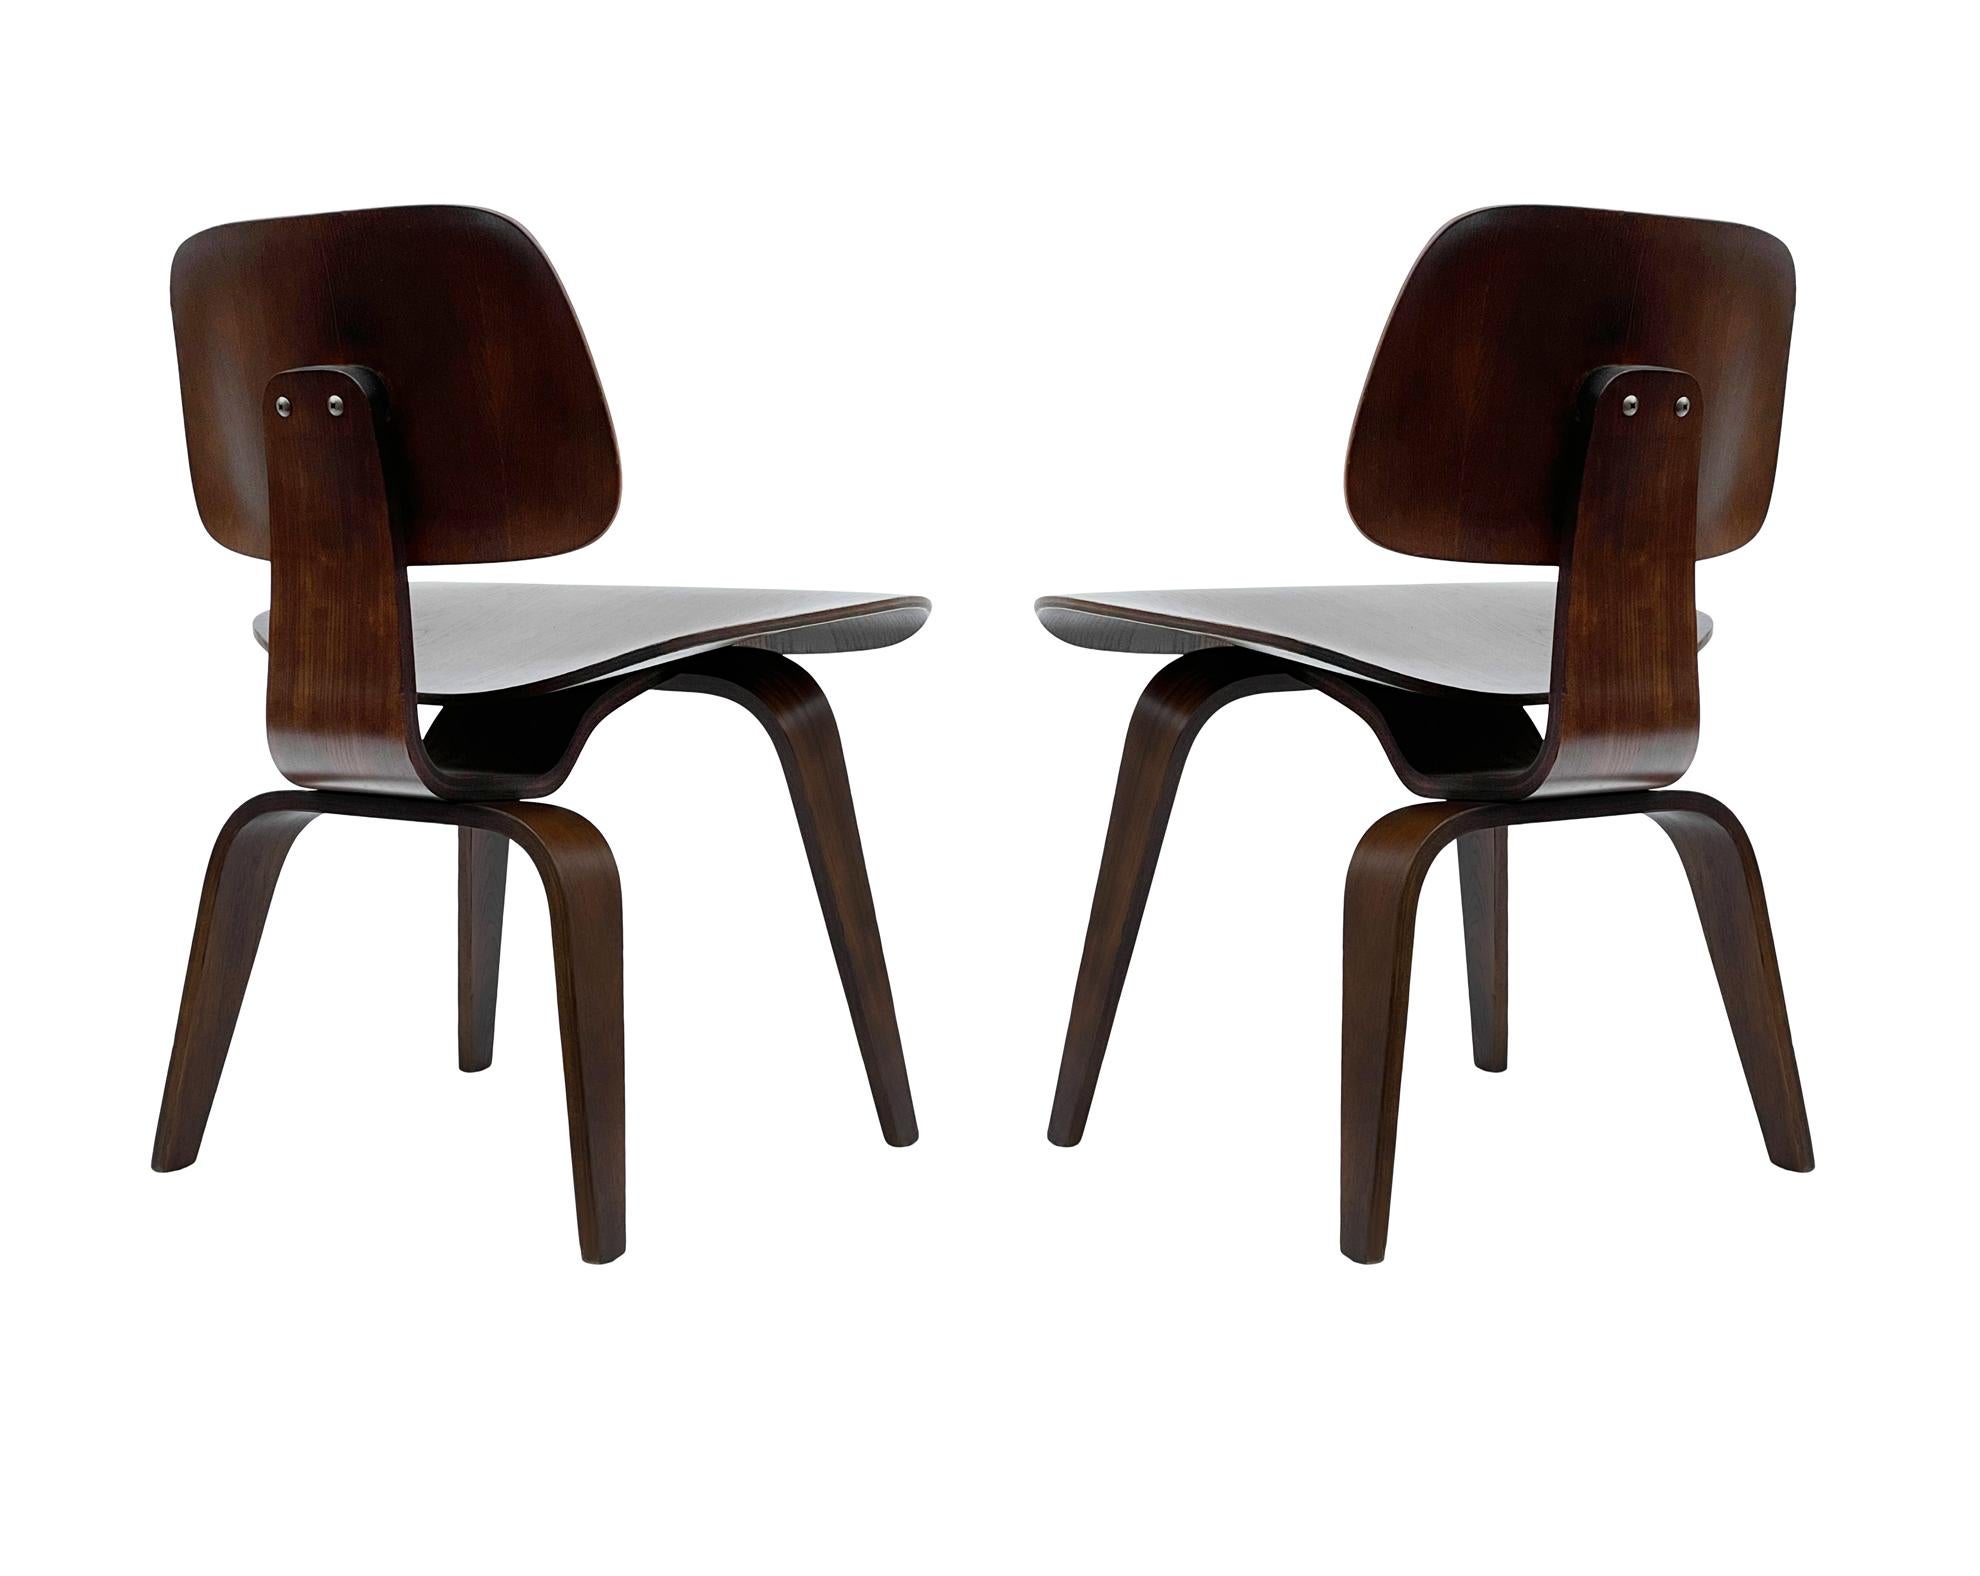 American Set of 4 Mid-Century Modern Dining Chairs by Charles Eames for Herman Miller For Sale